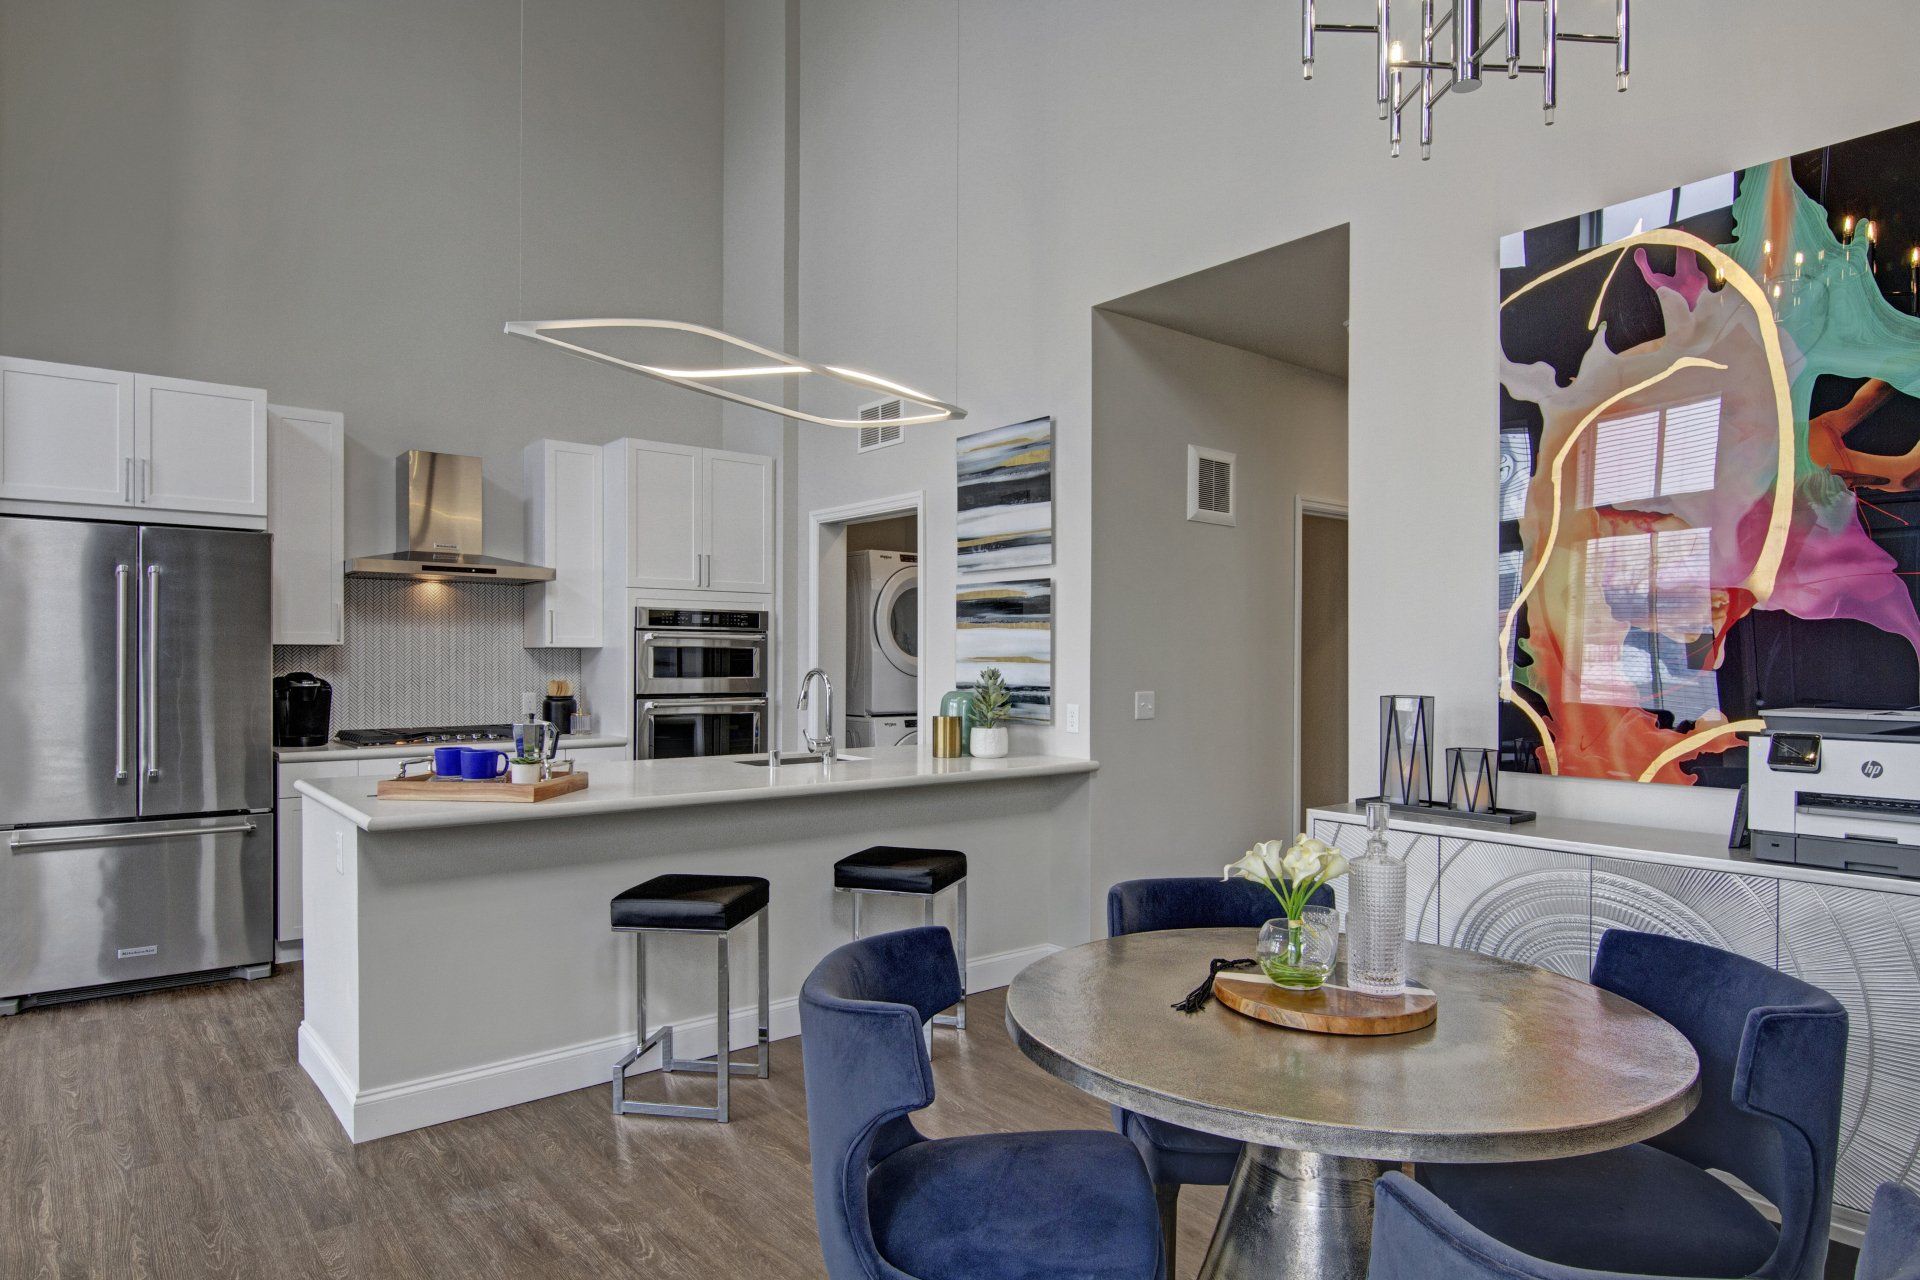 A kitchen with a table and chairs and a painting on the wall at Daymark Uptown Apartments.